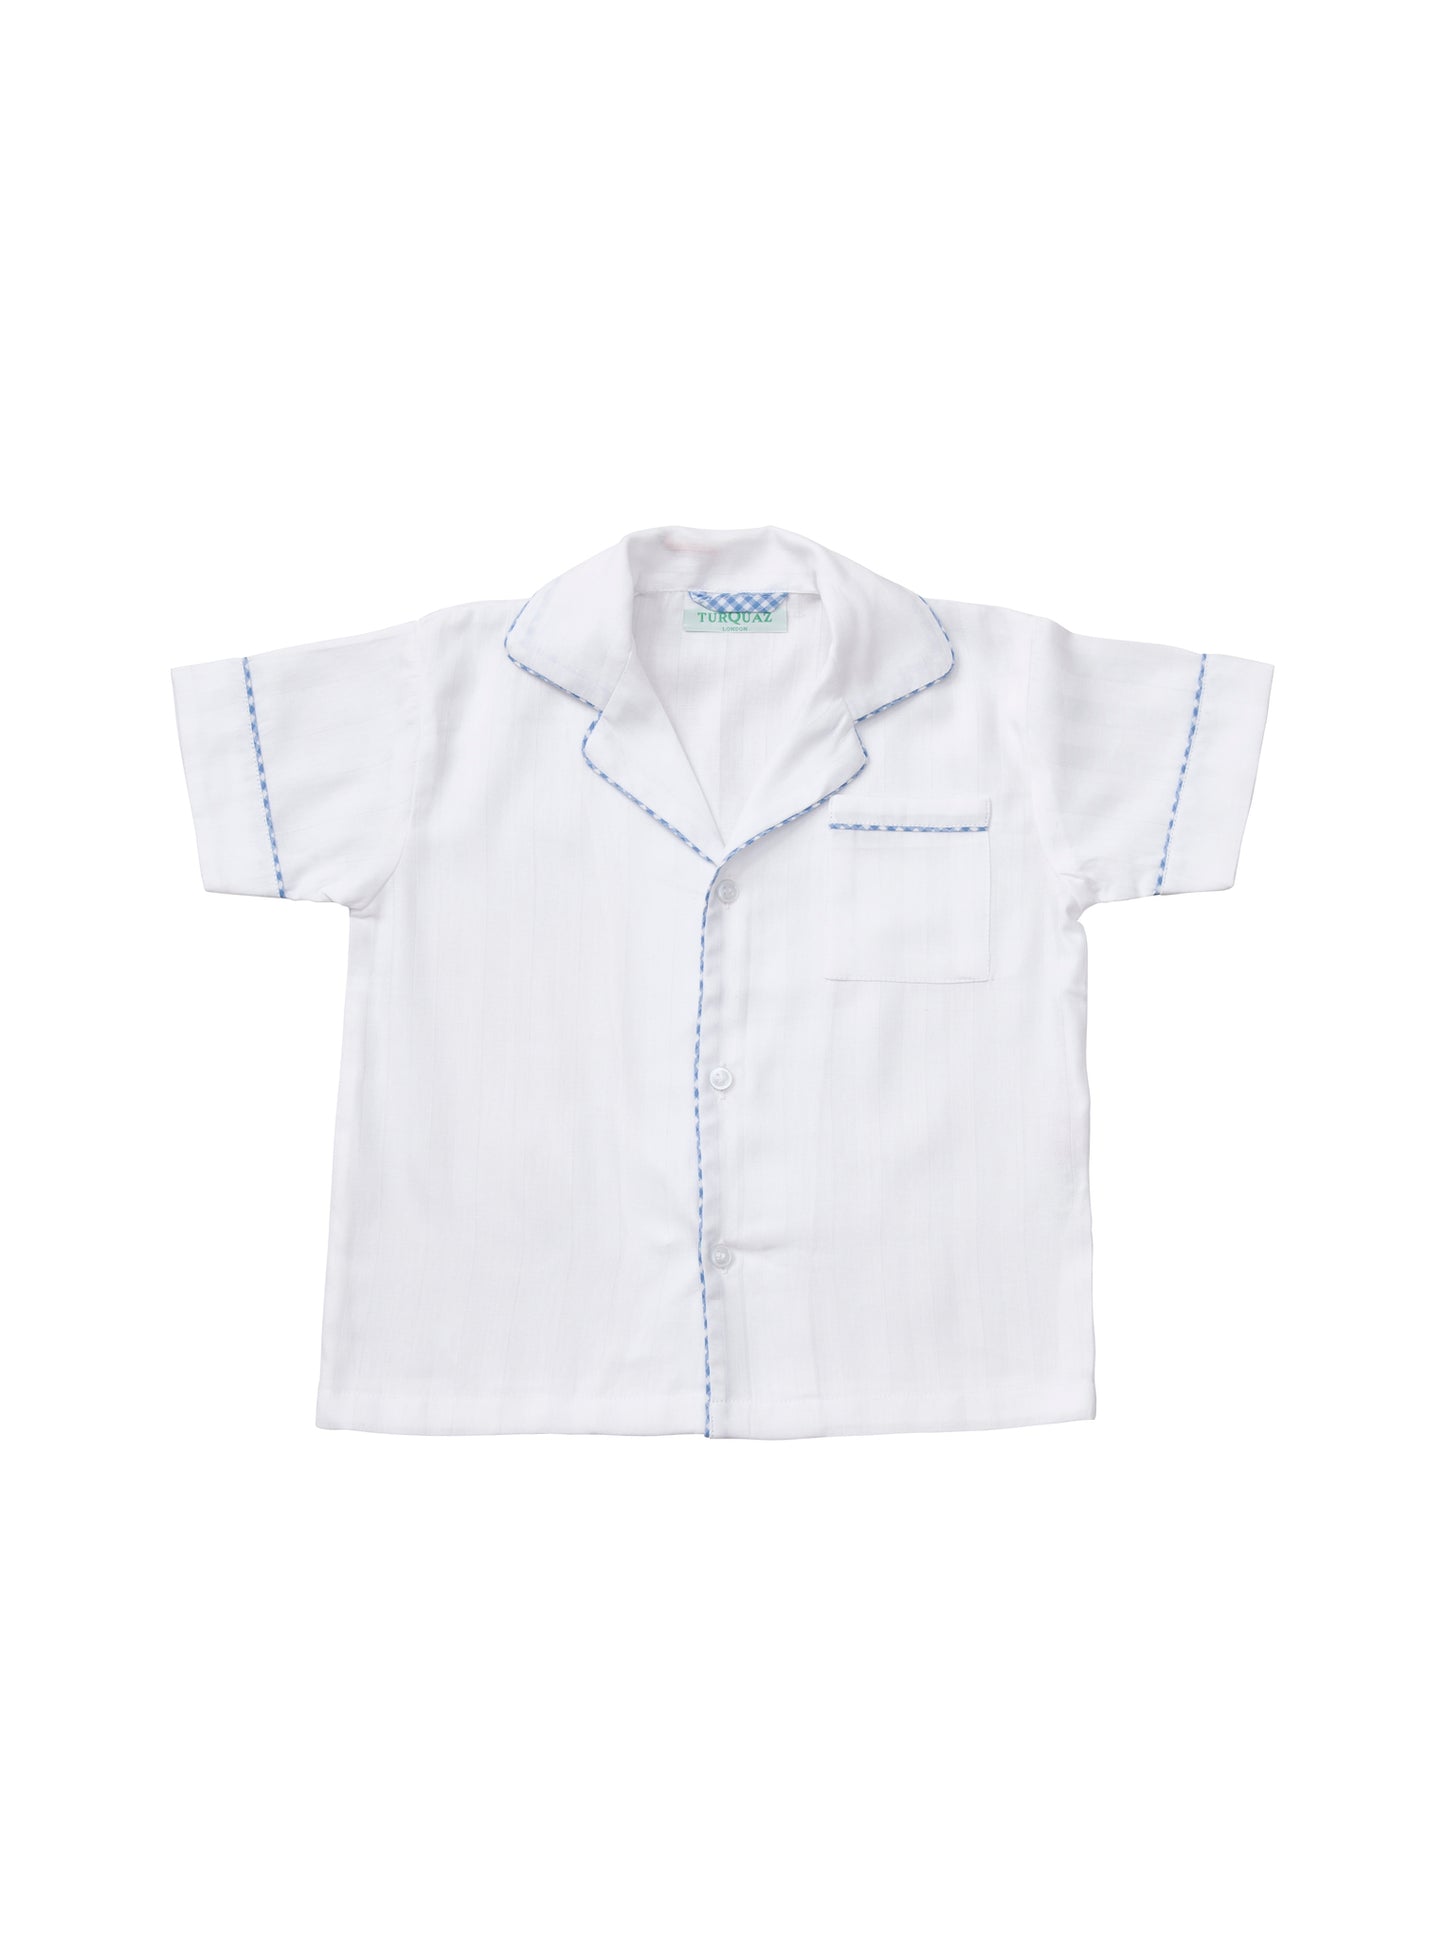 A classic white cropped pyjama set with blue gingham edging for children, from Turquaz.